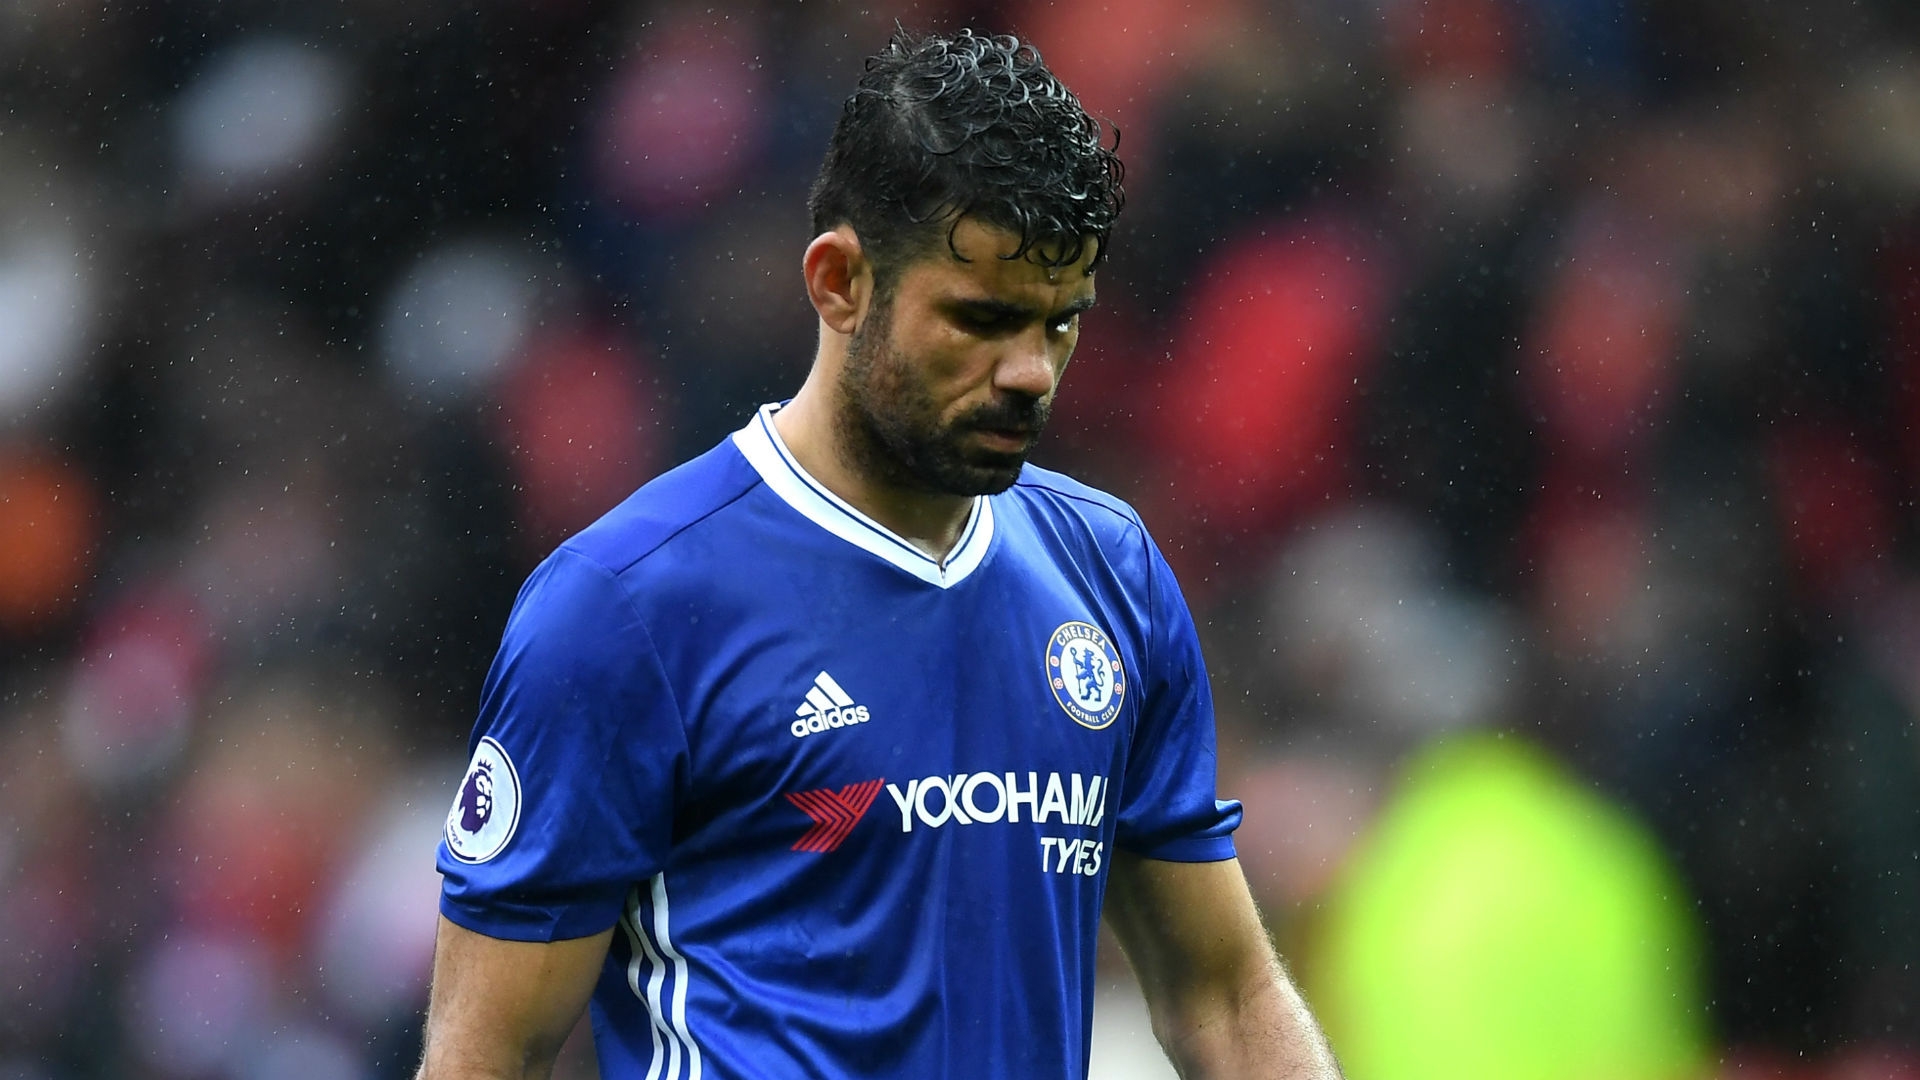 Costa was abruptly dropped out of Chelsea's squad, only to be brought back later in the season.